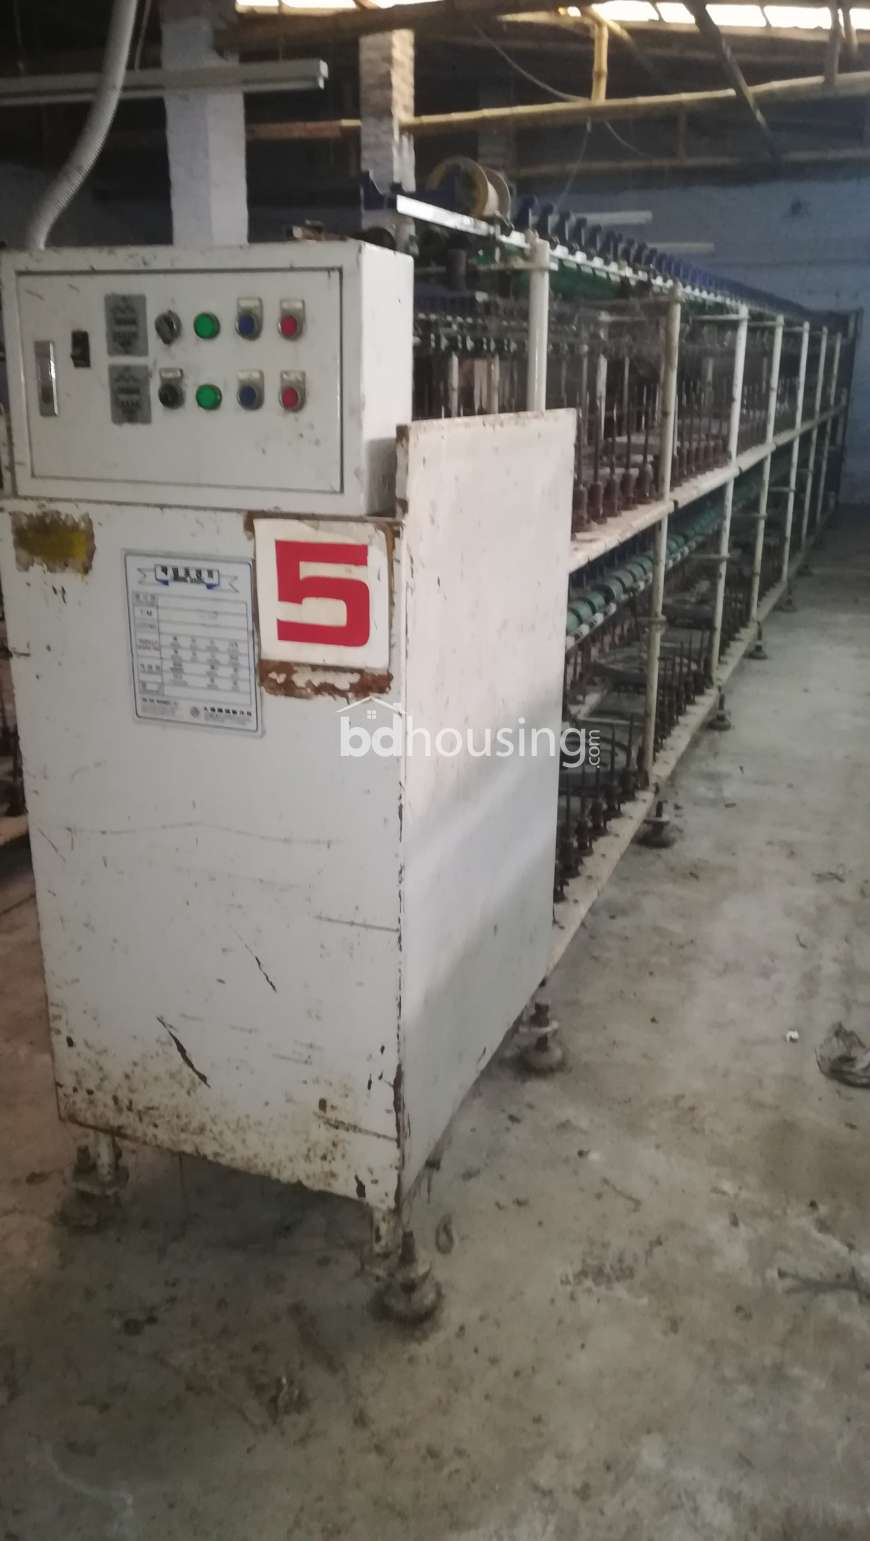 TWISTING machine, Commercial Plot at Mohanonda Residential Area